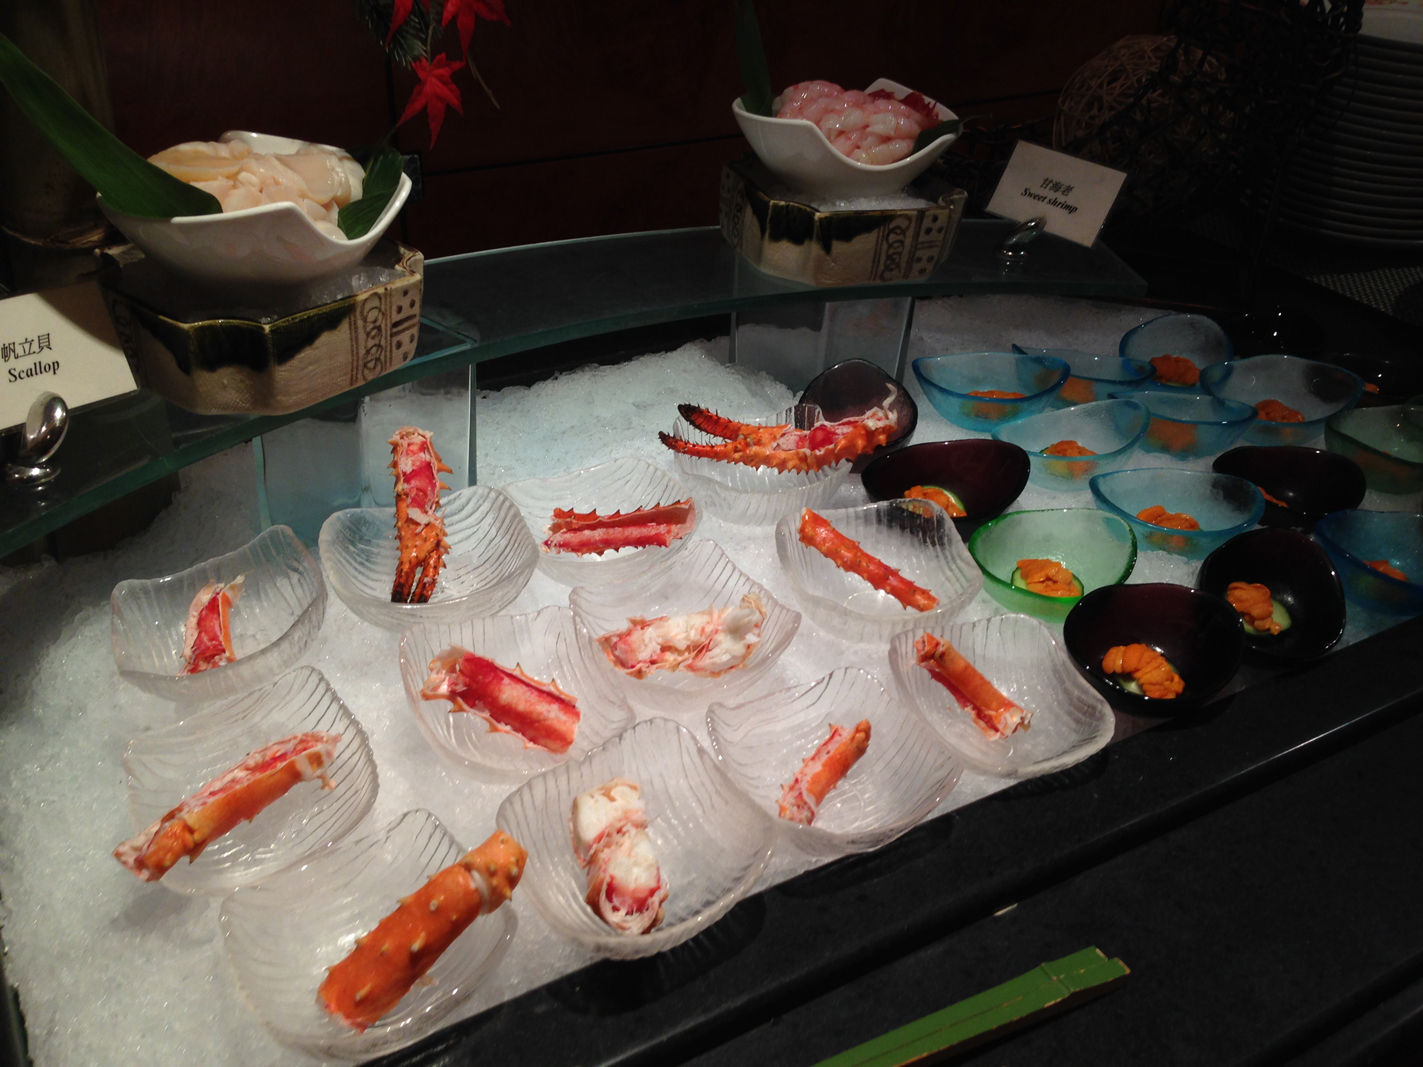 The next section was filled with Alaskan crab legs, umami, and other sashimi.